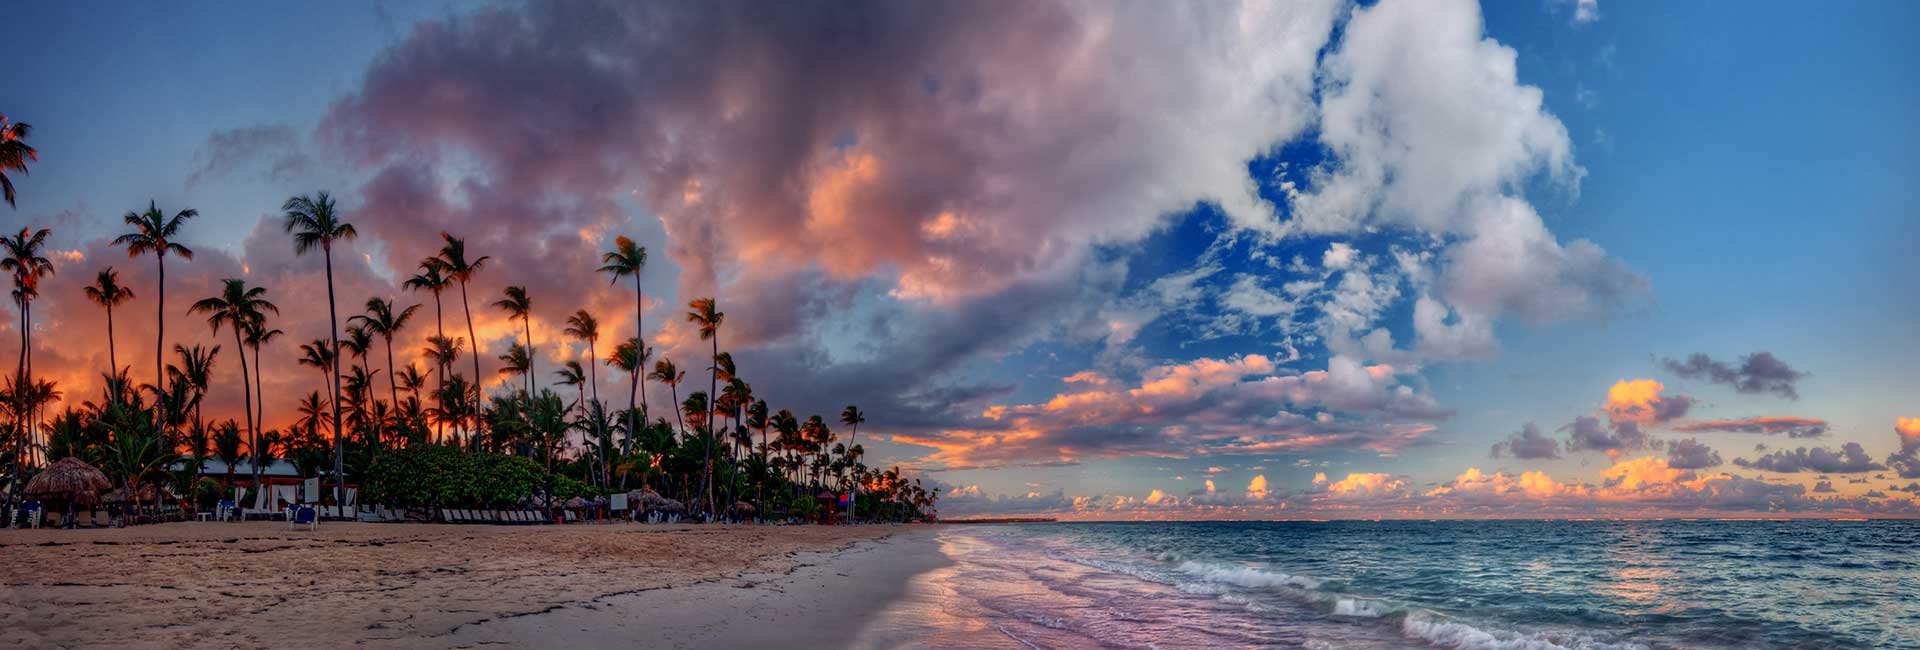 Beach at FORT LAUDERDALE